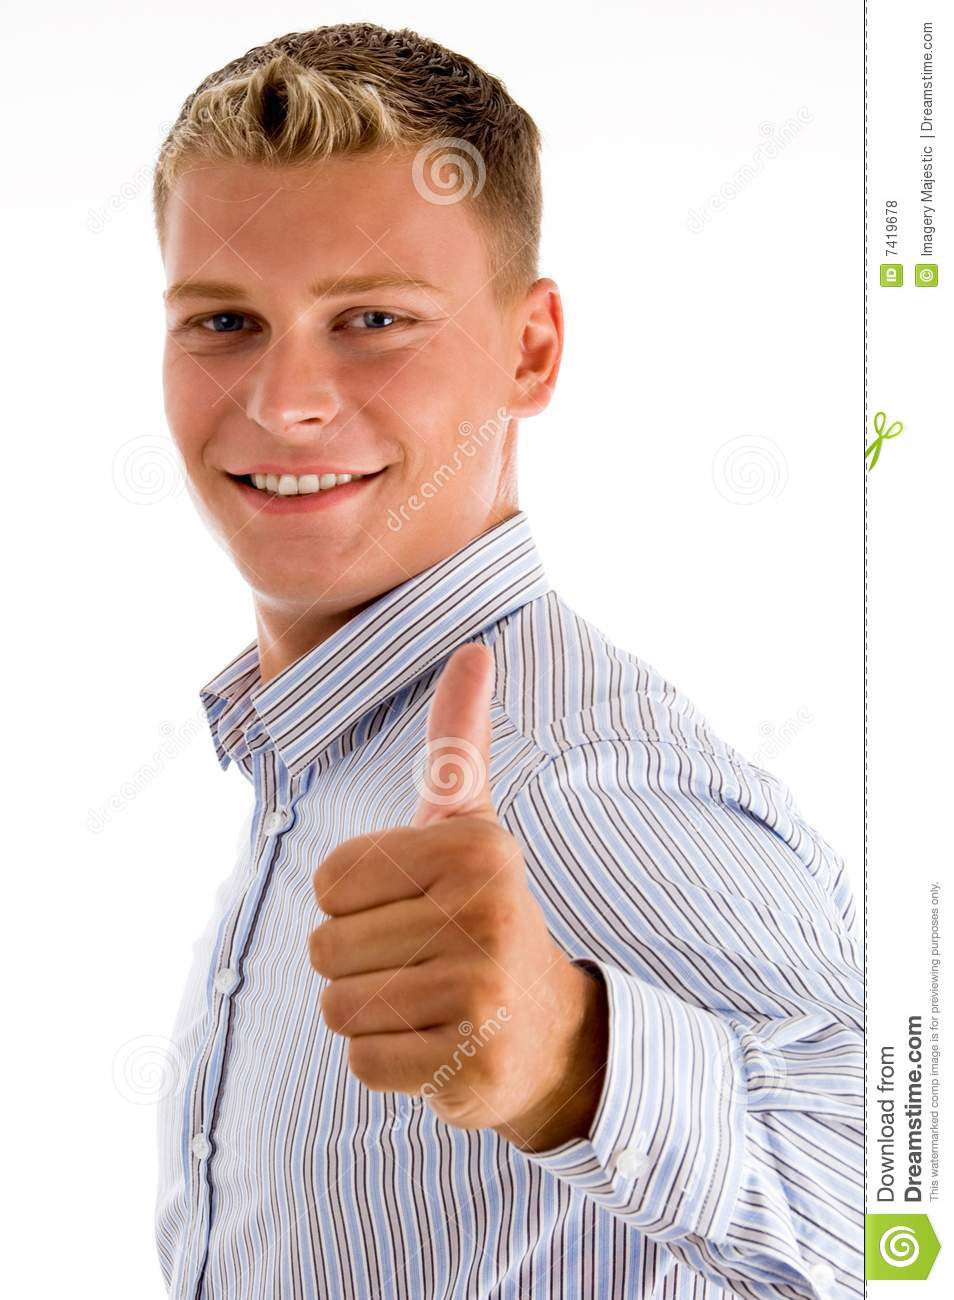 Handsome Man With Thumbs Up Royalty Free Stock Photos   Image  7419678